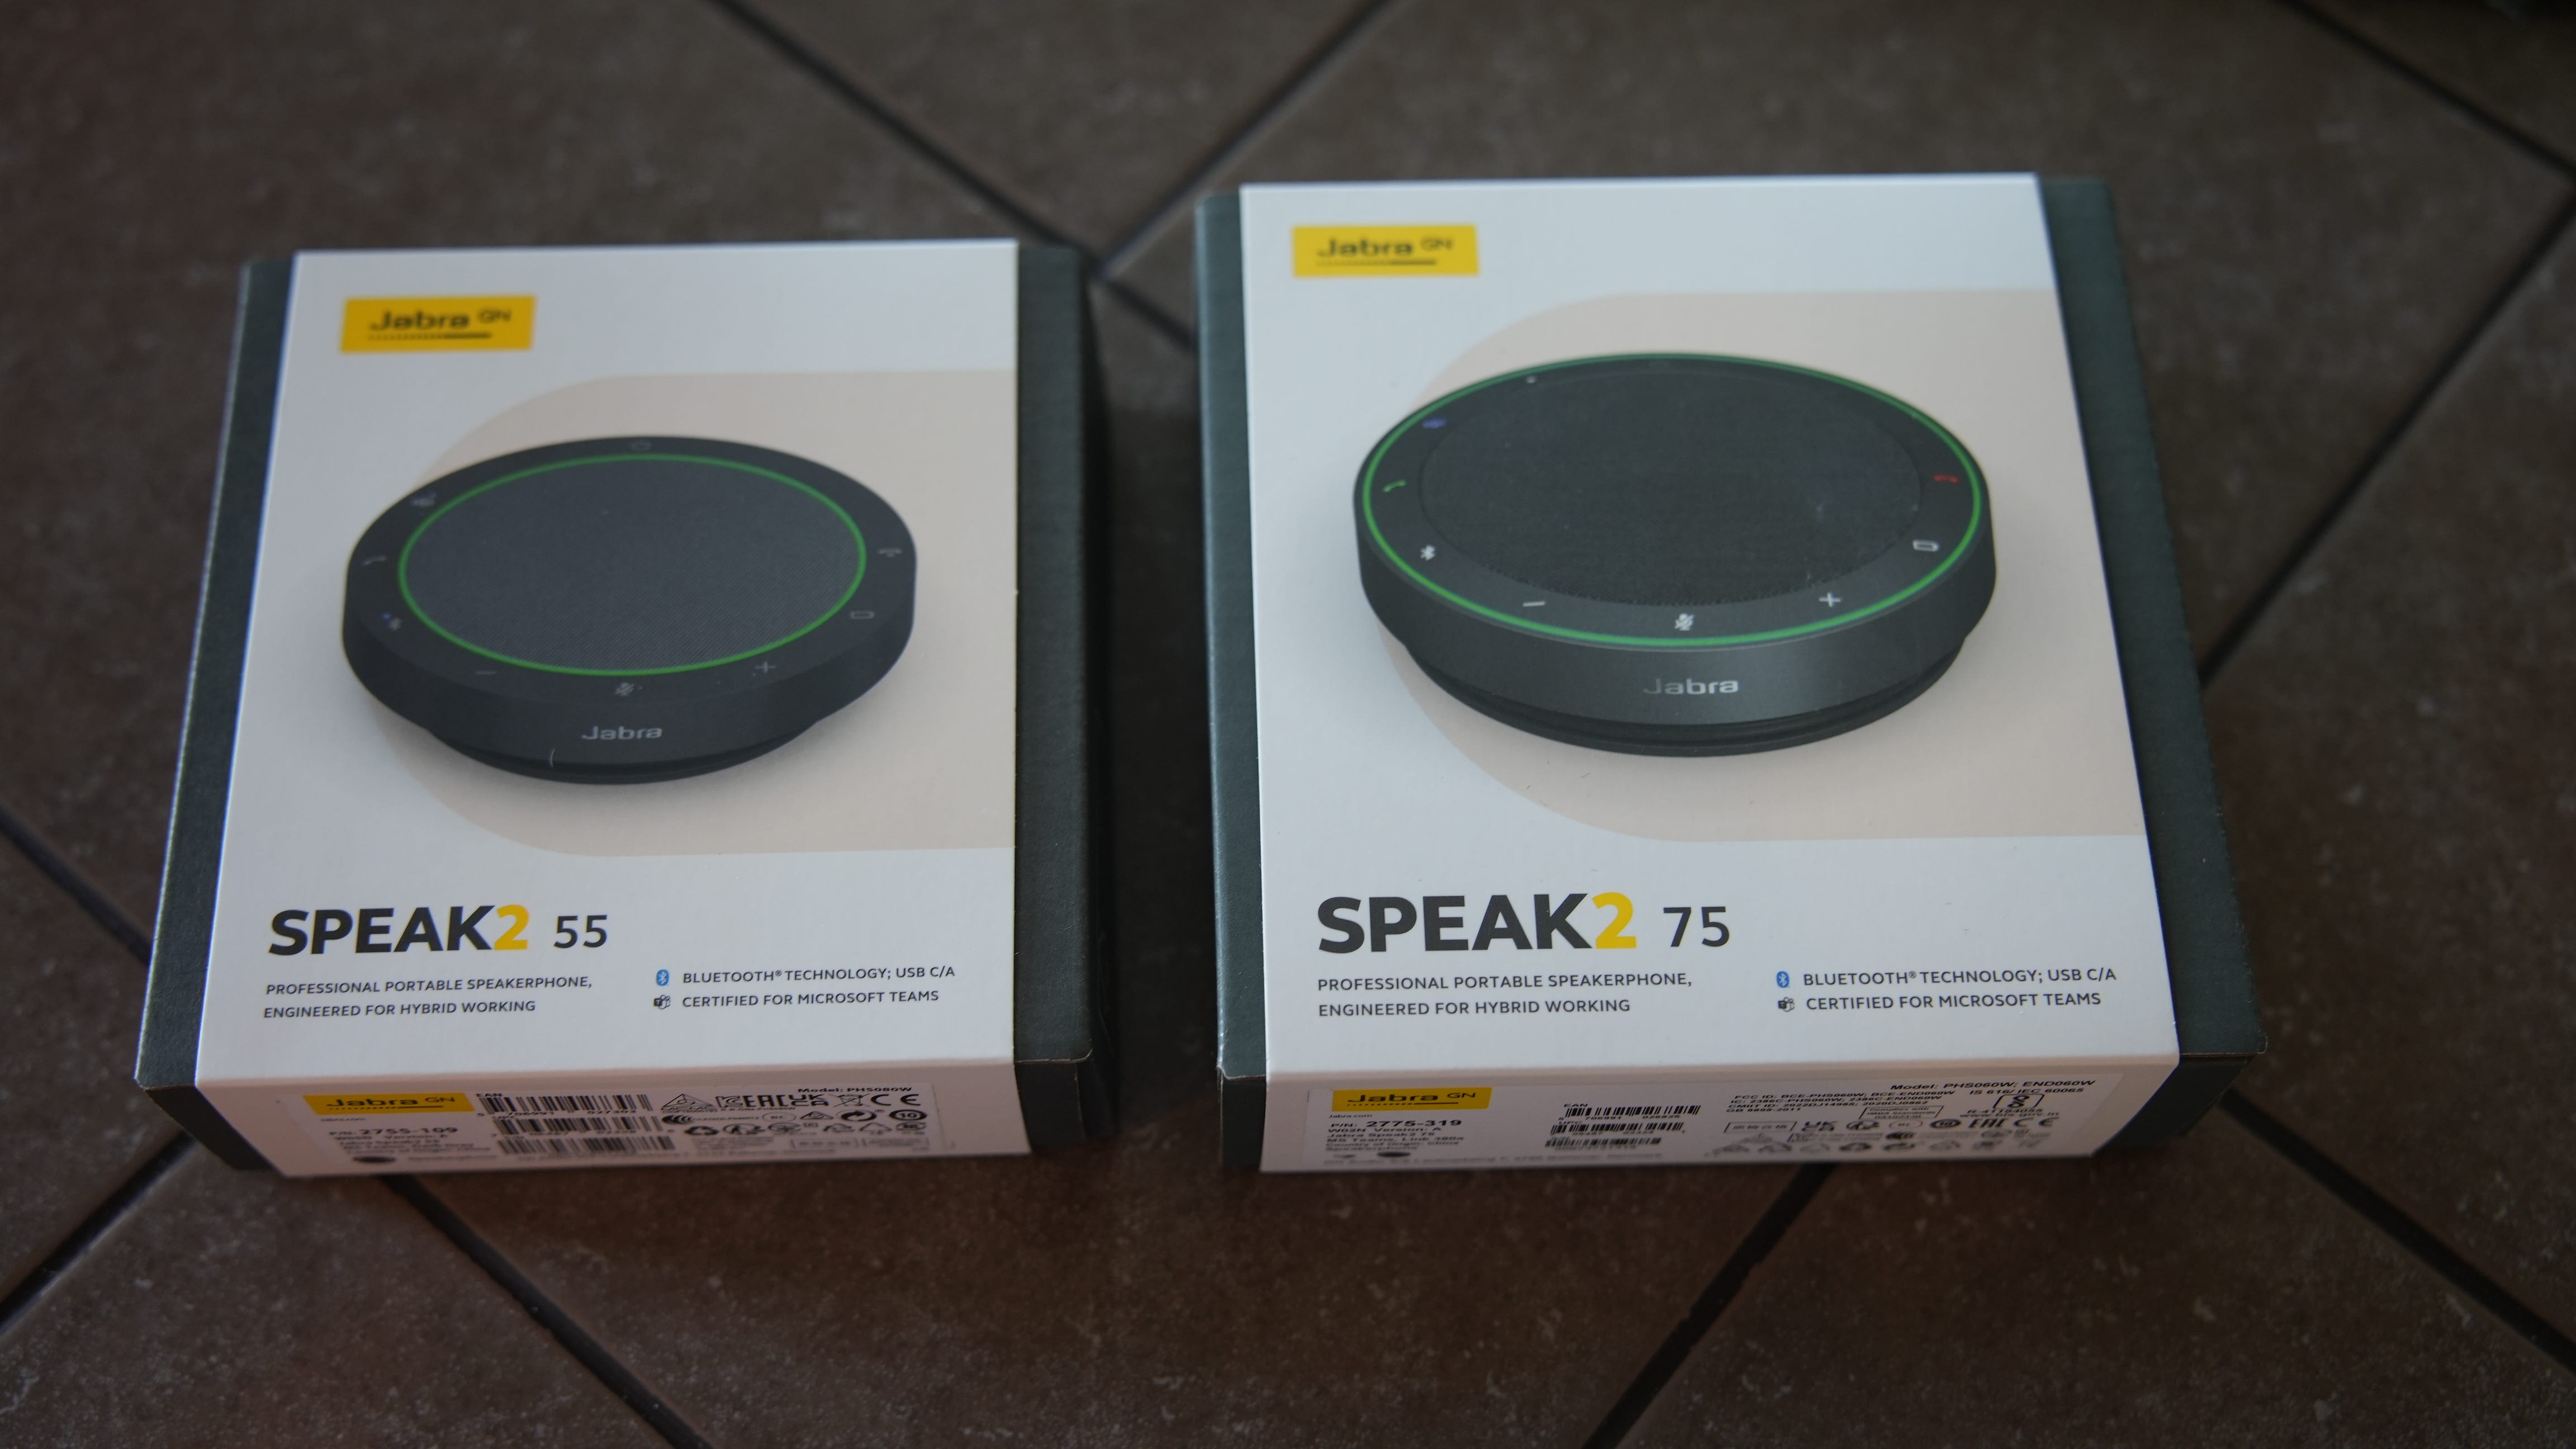 75 Jabra a hybrid speakerphone quality work your high review: Free Speak2 with